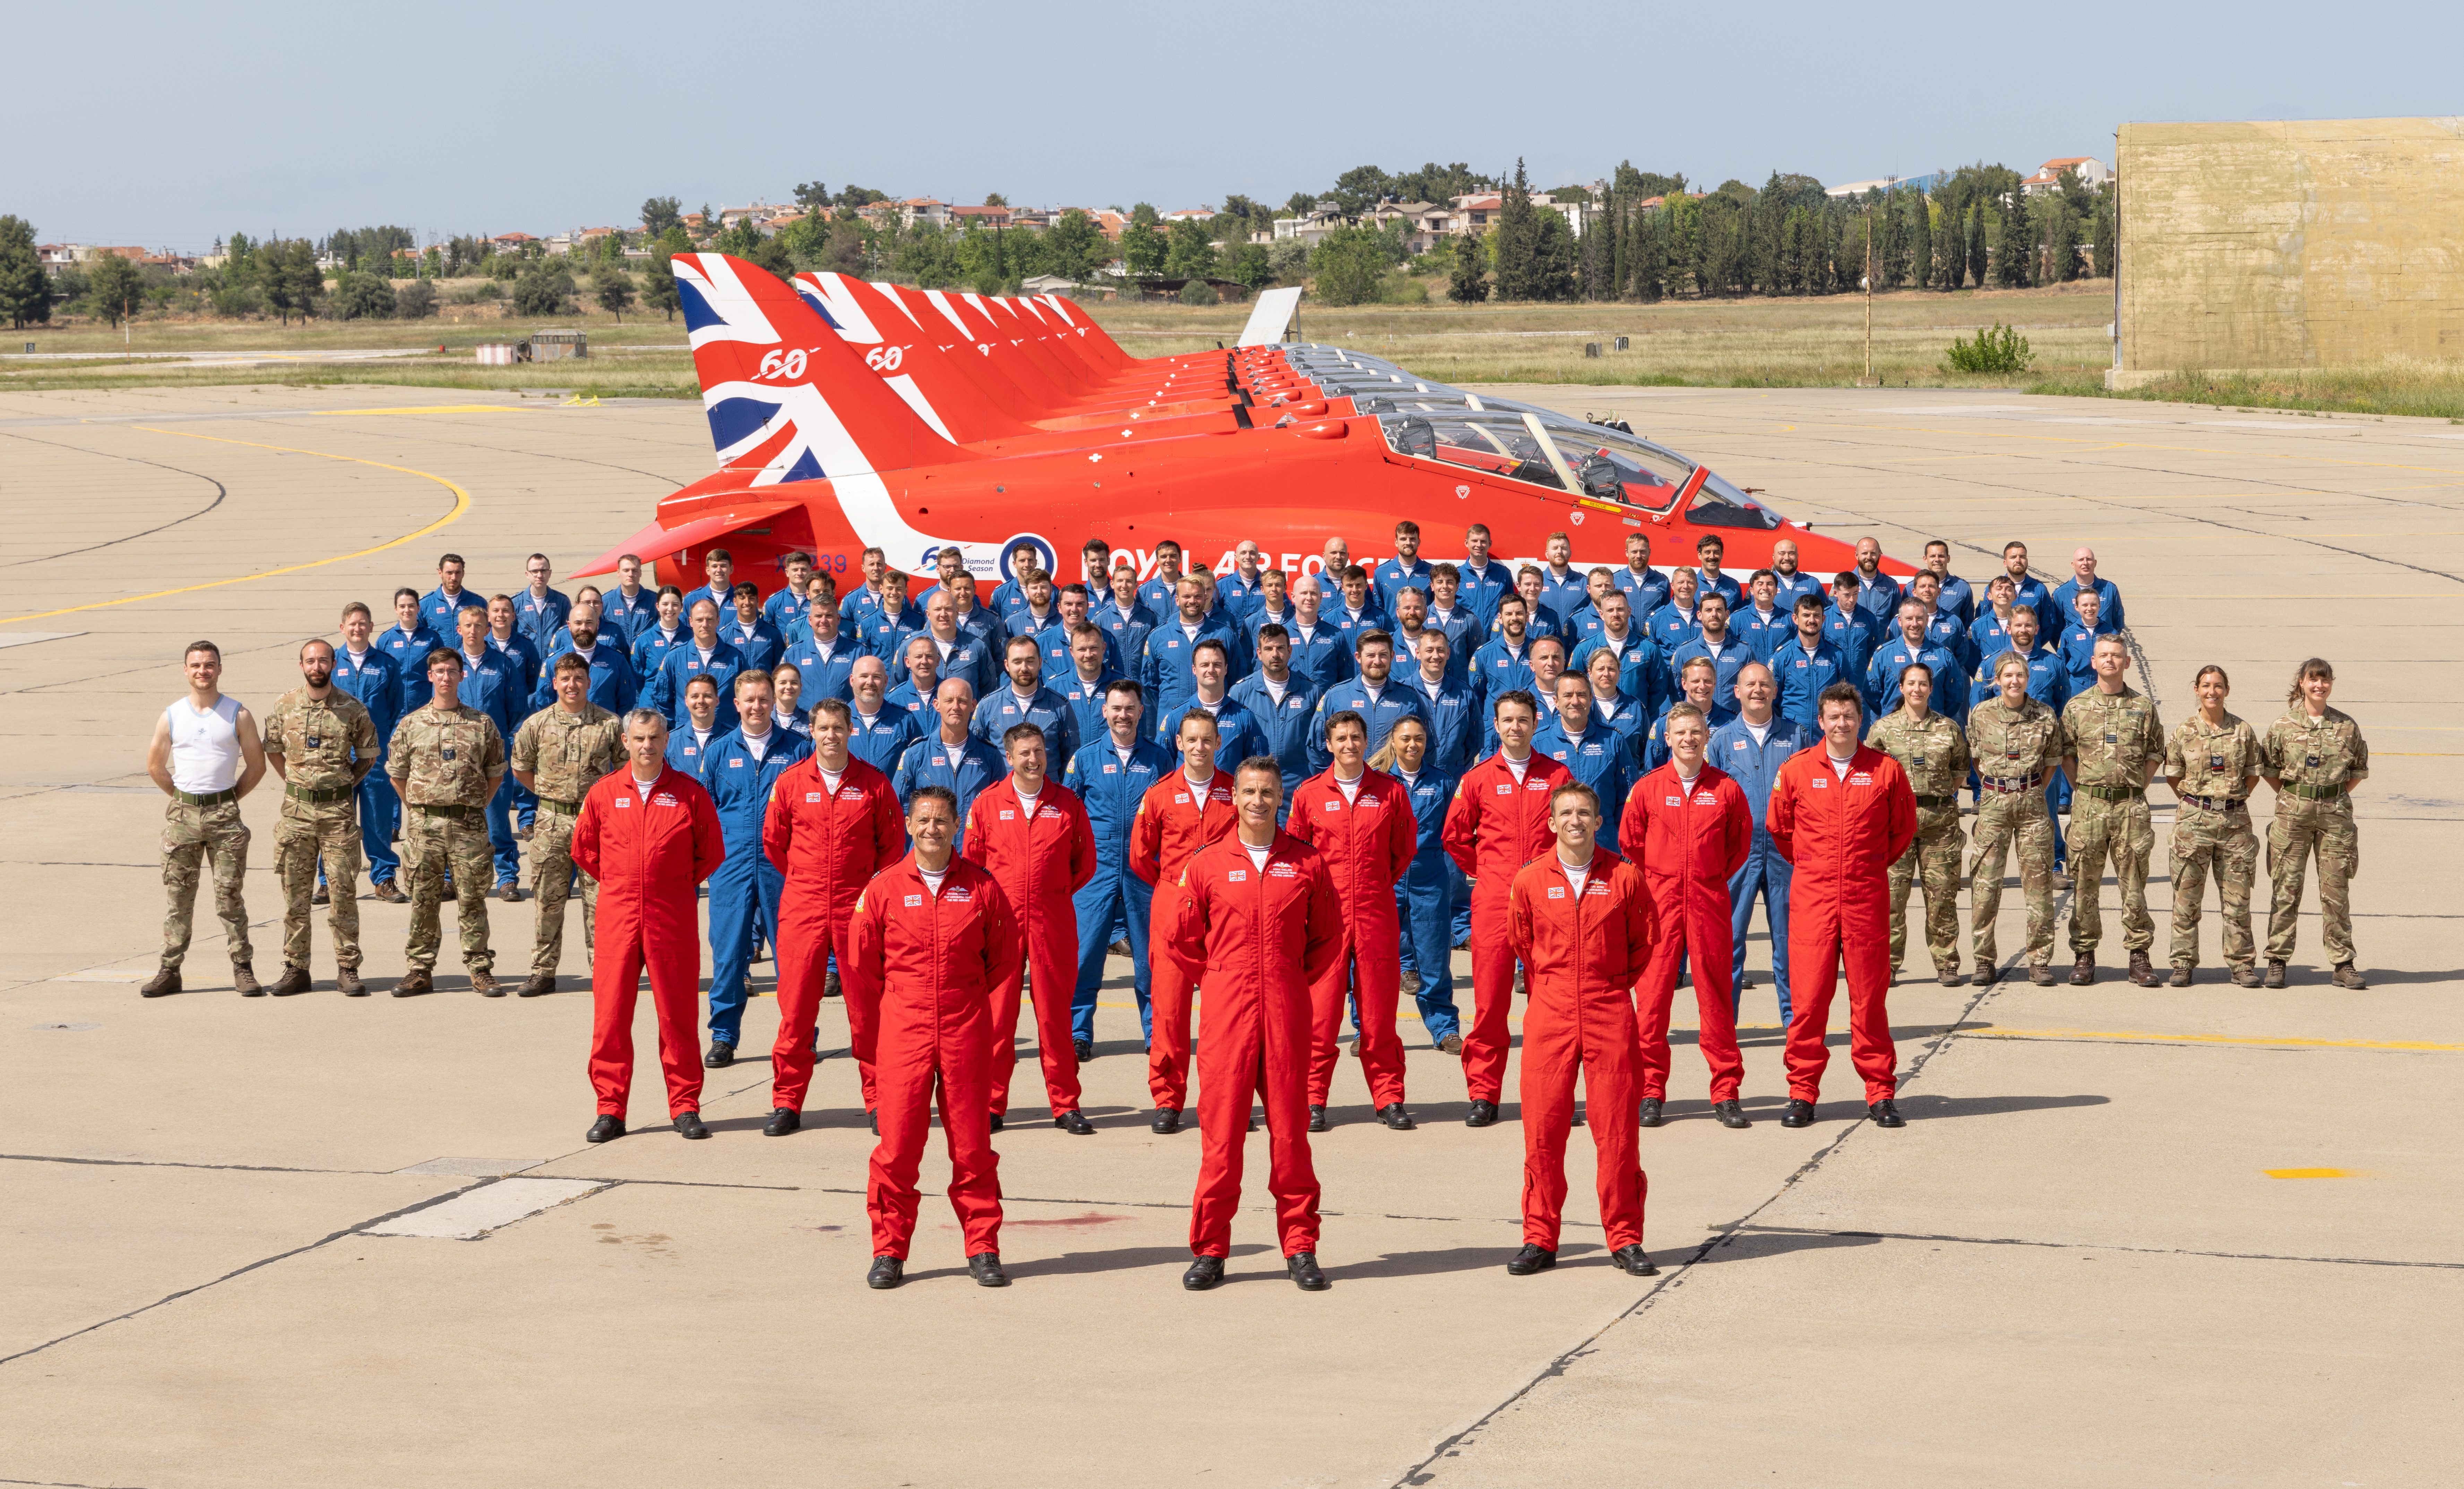 The Red Arrows team and supporting RAF personnel from other units in Greece.